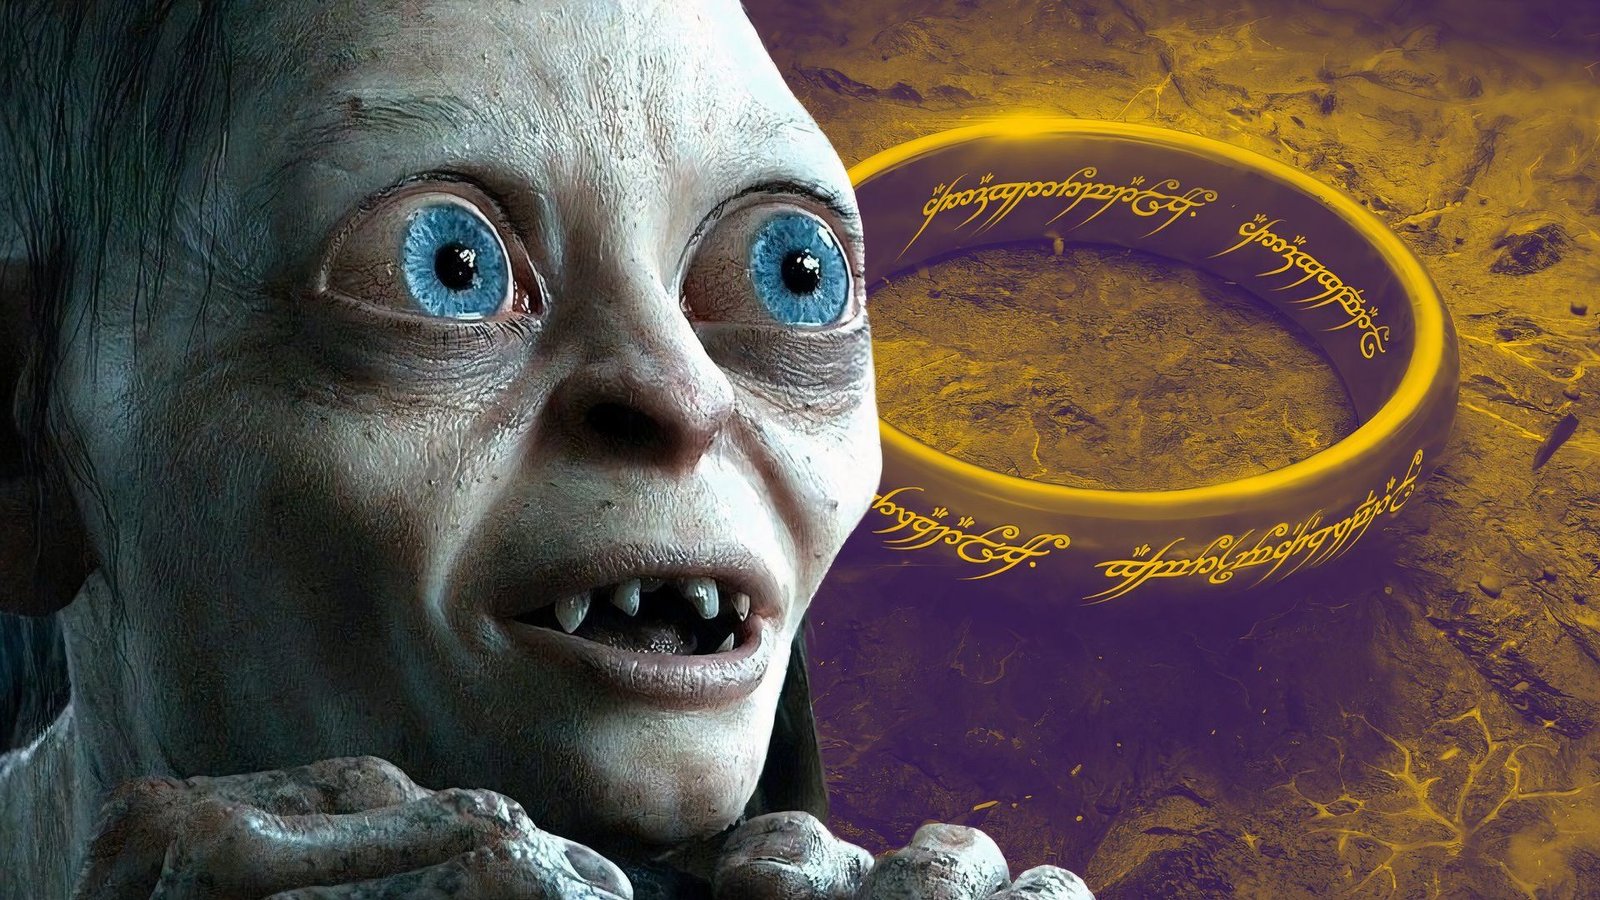 Andy Serkis Is the Perfect Director for This New Lord of the Rings Movie